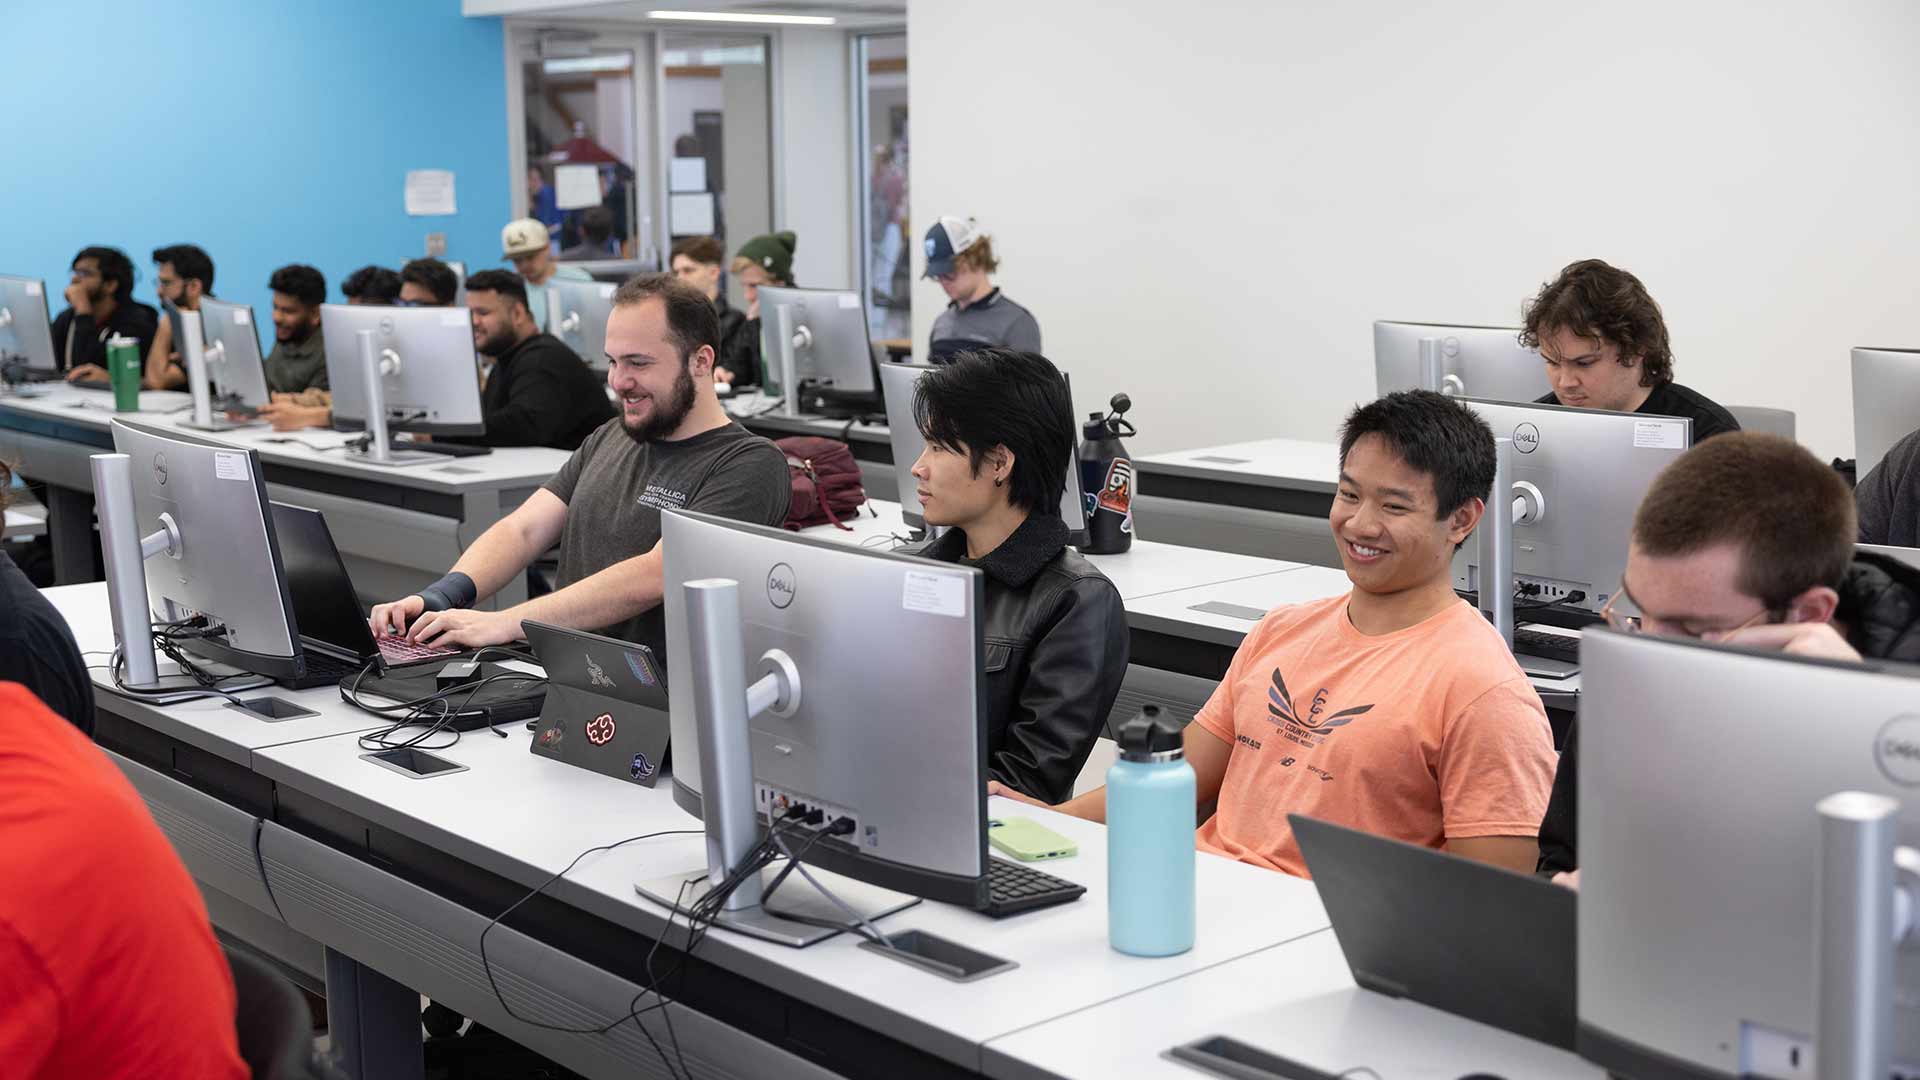 Three computer science students smile while working on a class project during an Intro to Software Development (CSC 450) course. Other students are seen in the background.